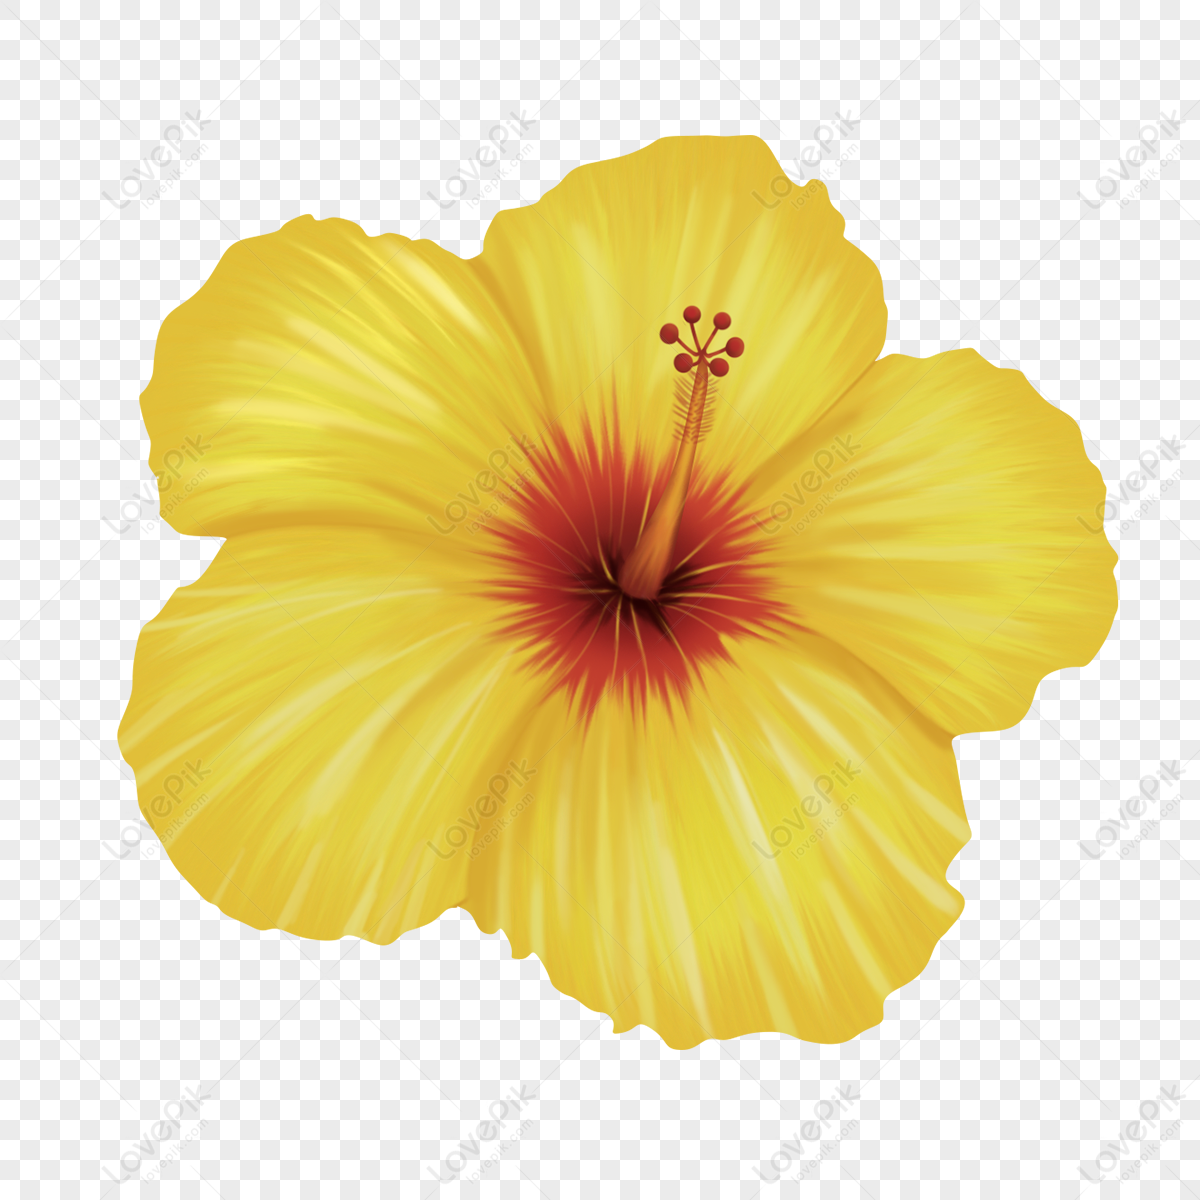 Yellow Flowers PNG Picture And Clipart Image For Free Download - Lovepik |  400275445